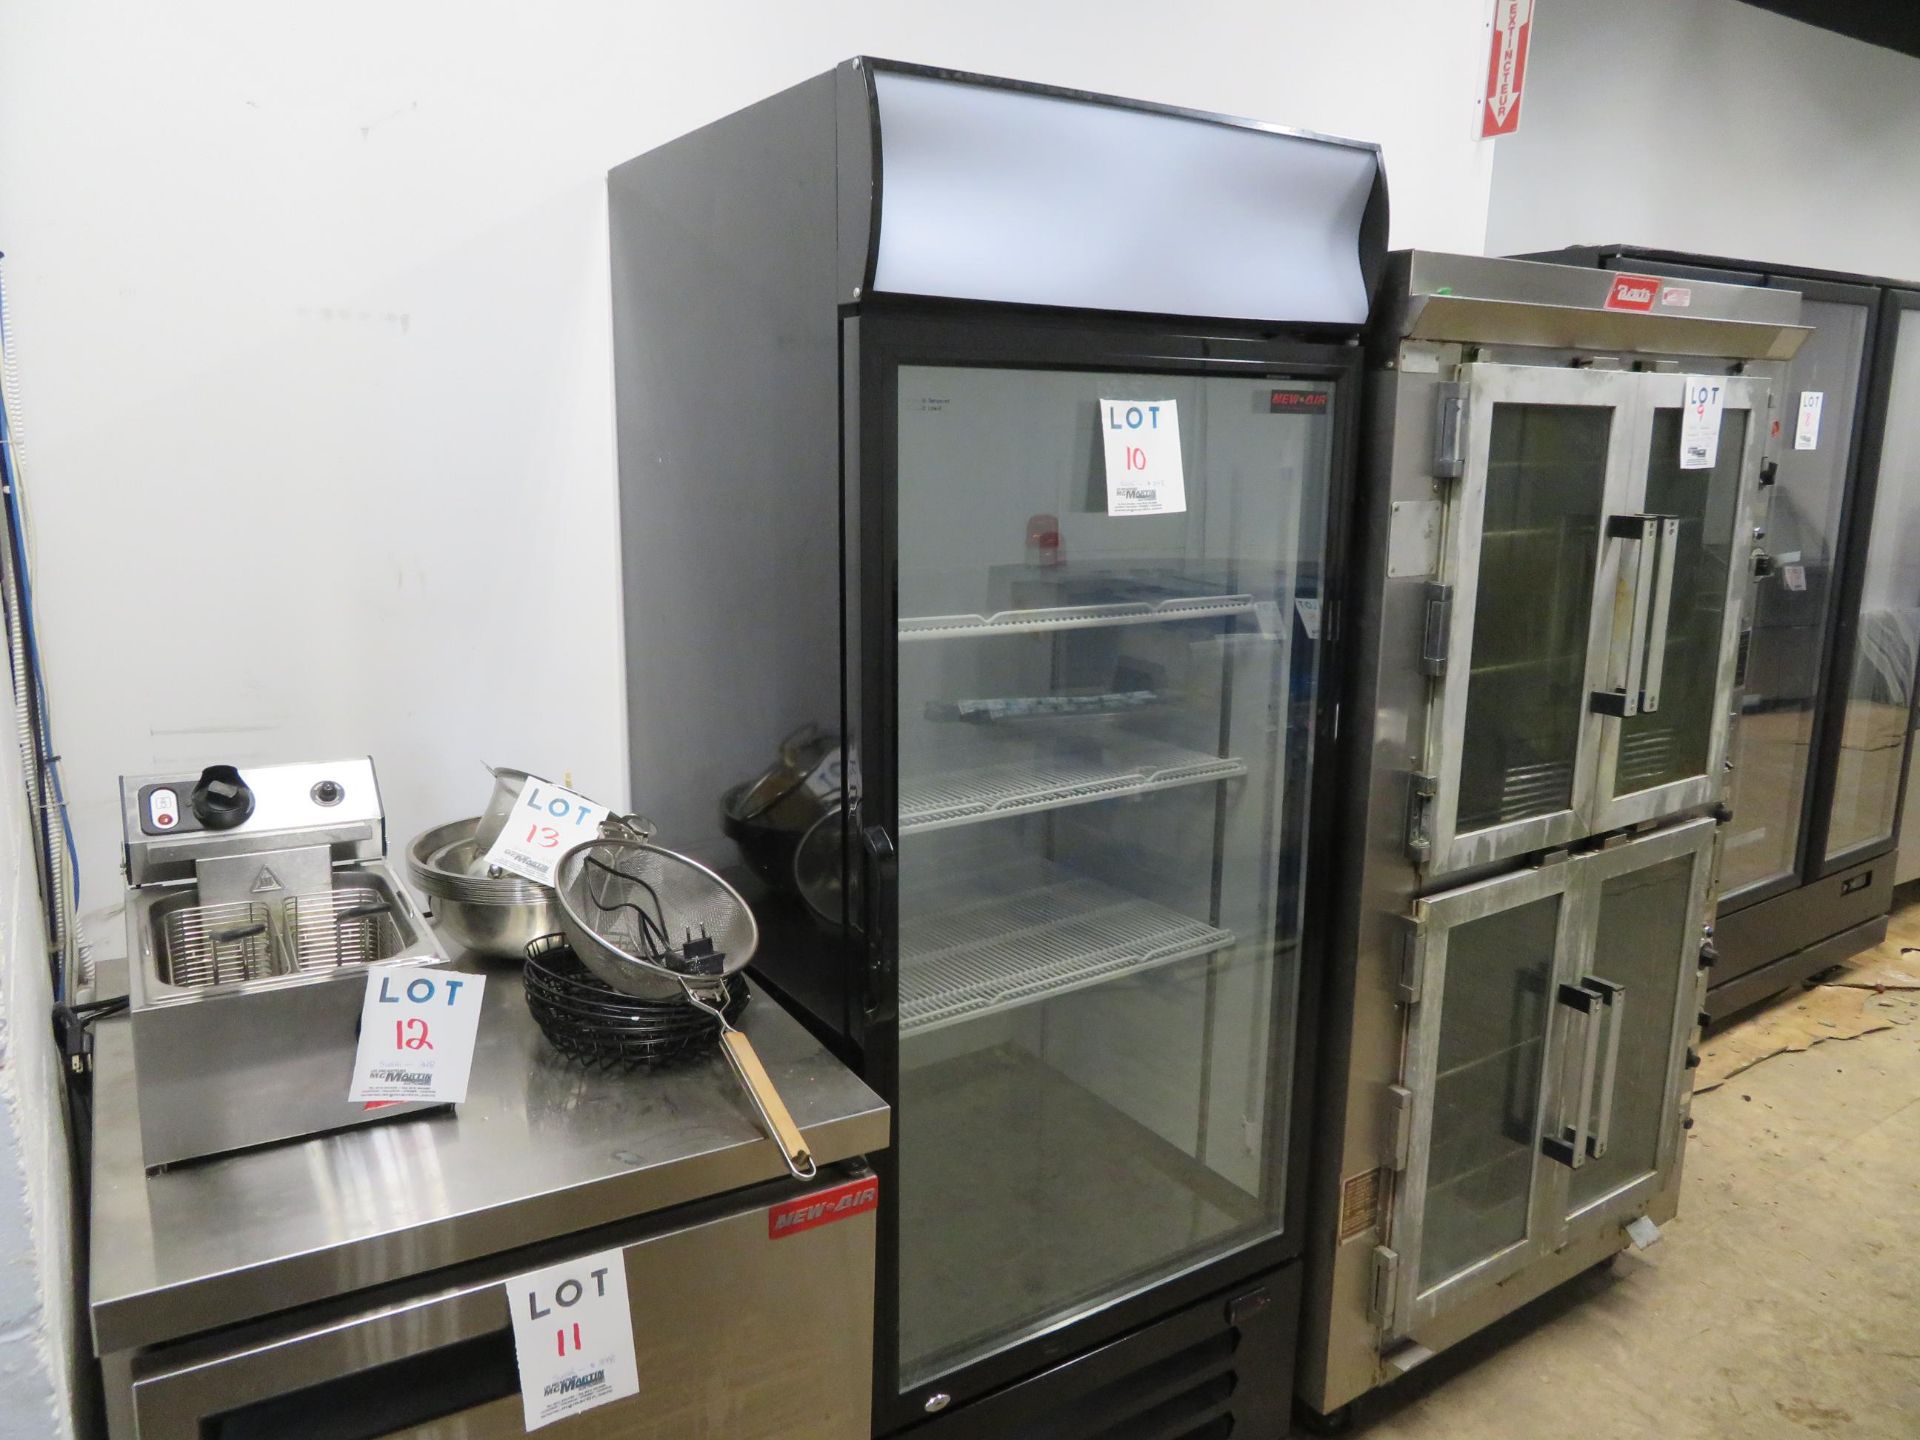 NEW AIR 1 door glass upright refrigerator on wheels, Mod # NGR-068H, approx. 30"w x 30"d x 79"h - Image 2 of 4